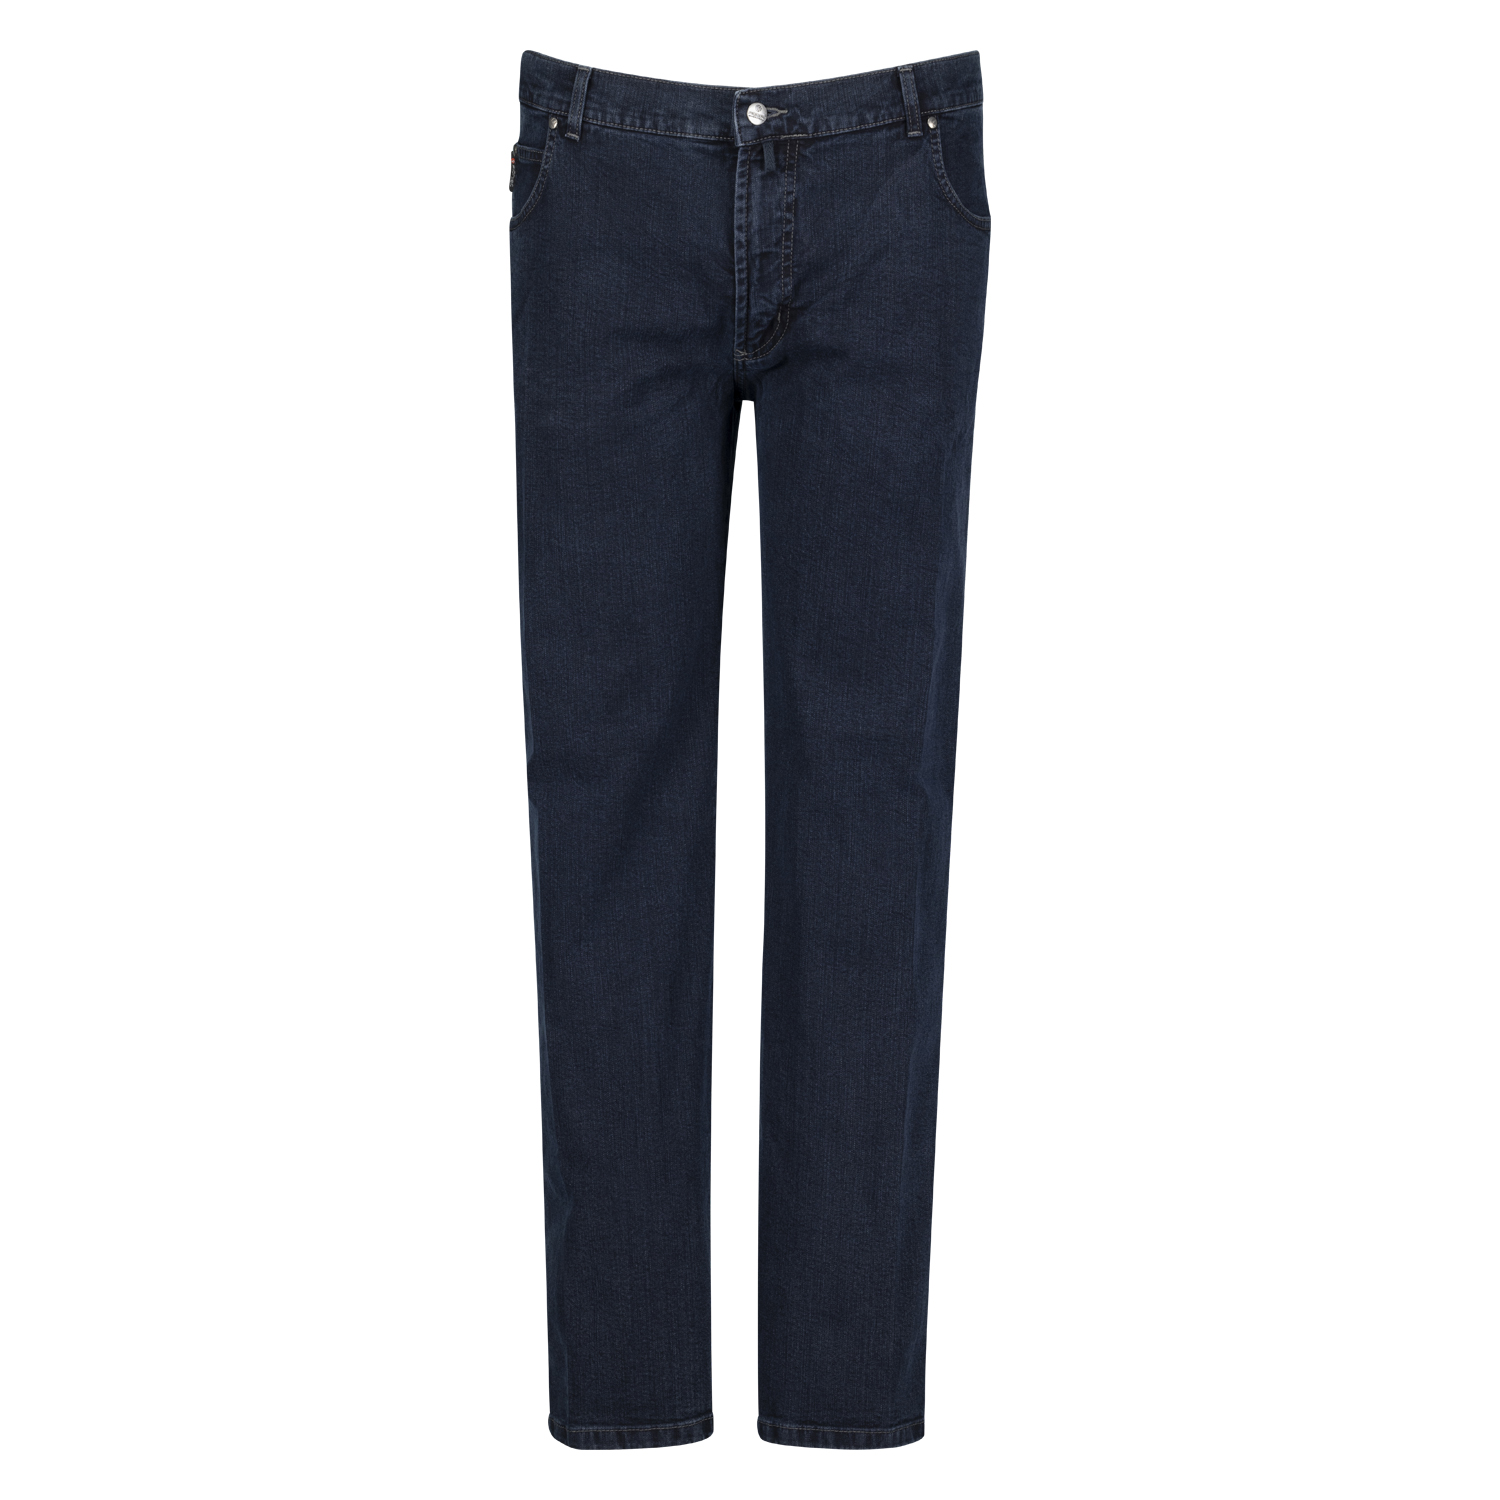 5-Pocket Jeans homme avec stretch "Peter" dark blue stonewash by Pioneer grandes tailles (Taille normale): 56 - 74